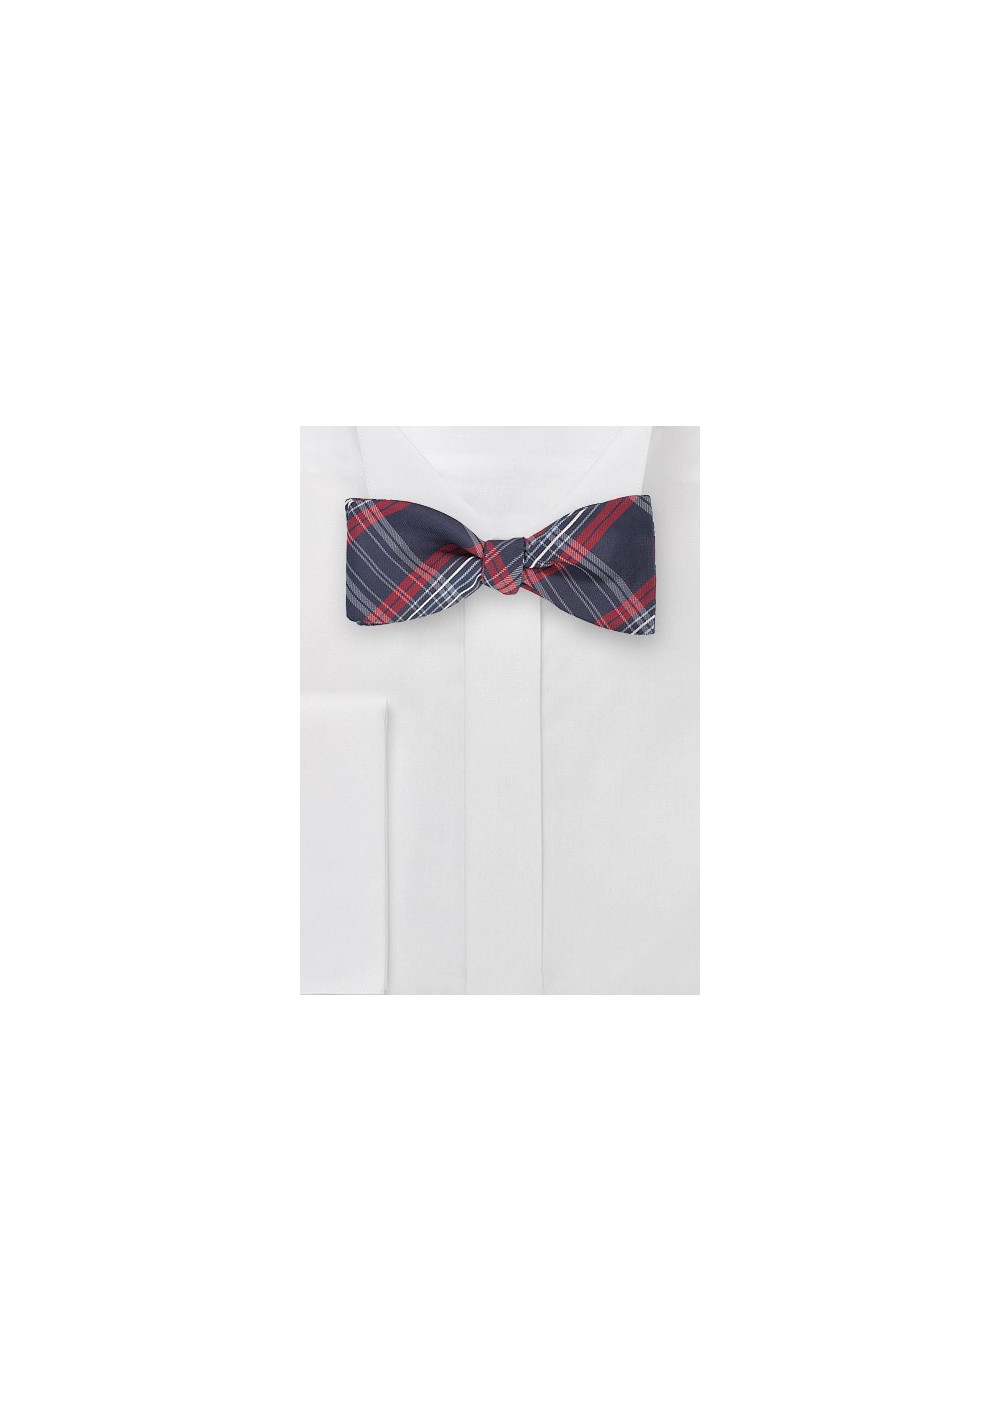 Tartan Plaid Bow Tie in Reds and Navys